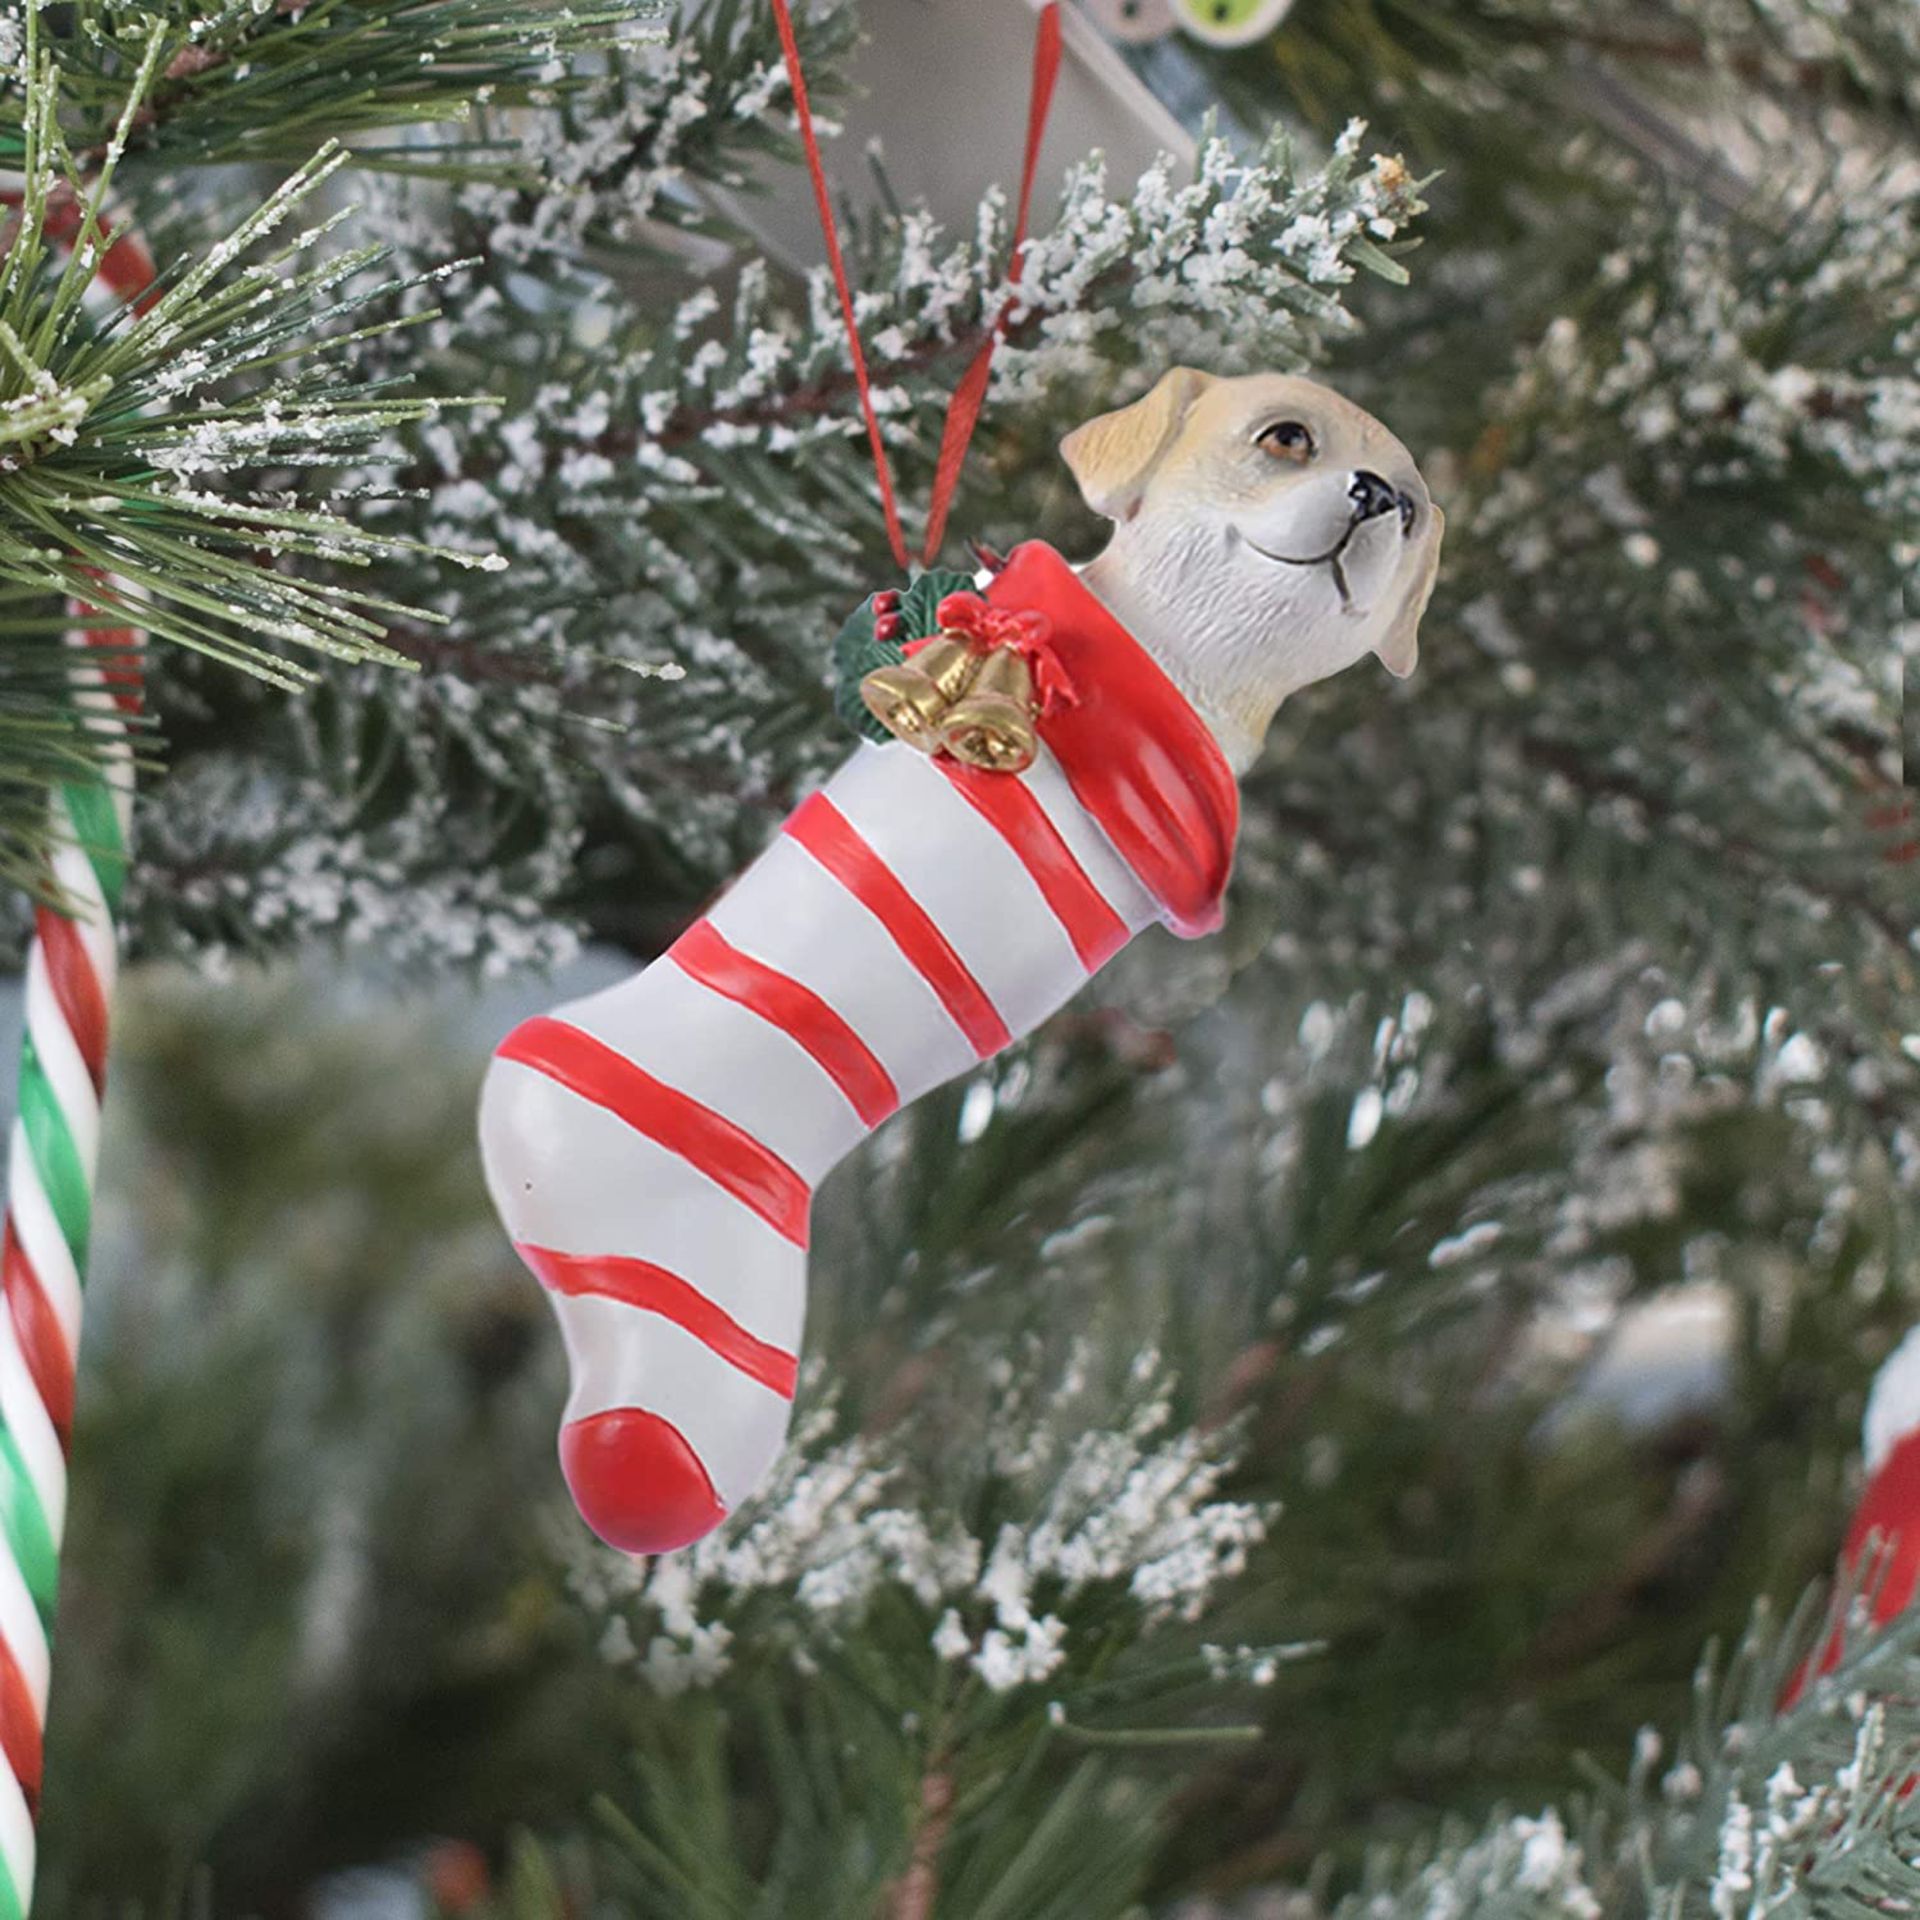 10 x Resin Dog In Stocking Christmas Tree Hangers - Image 3 of 7